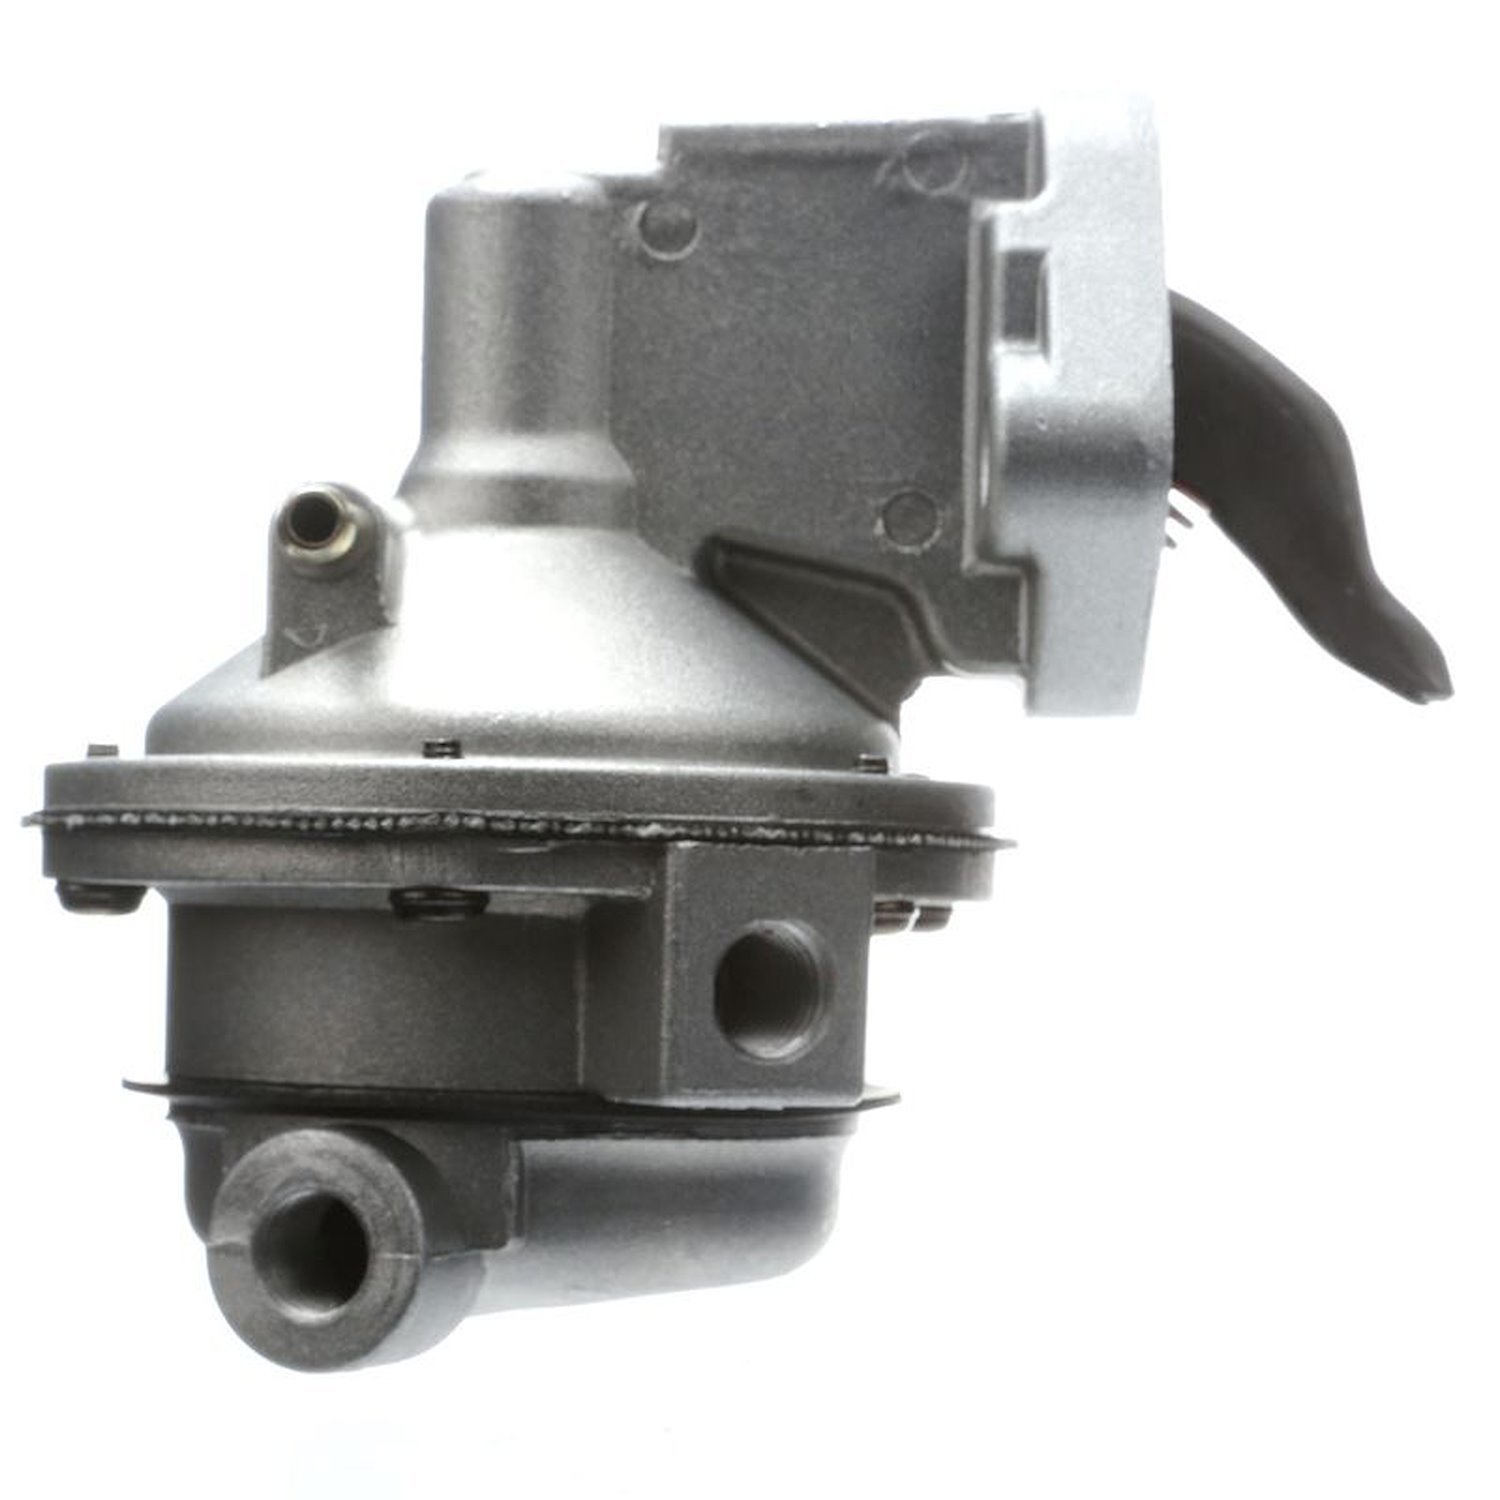 Mechanical Fuel Pump for 1958-1969 Chevy